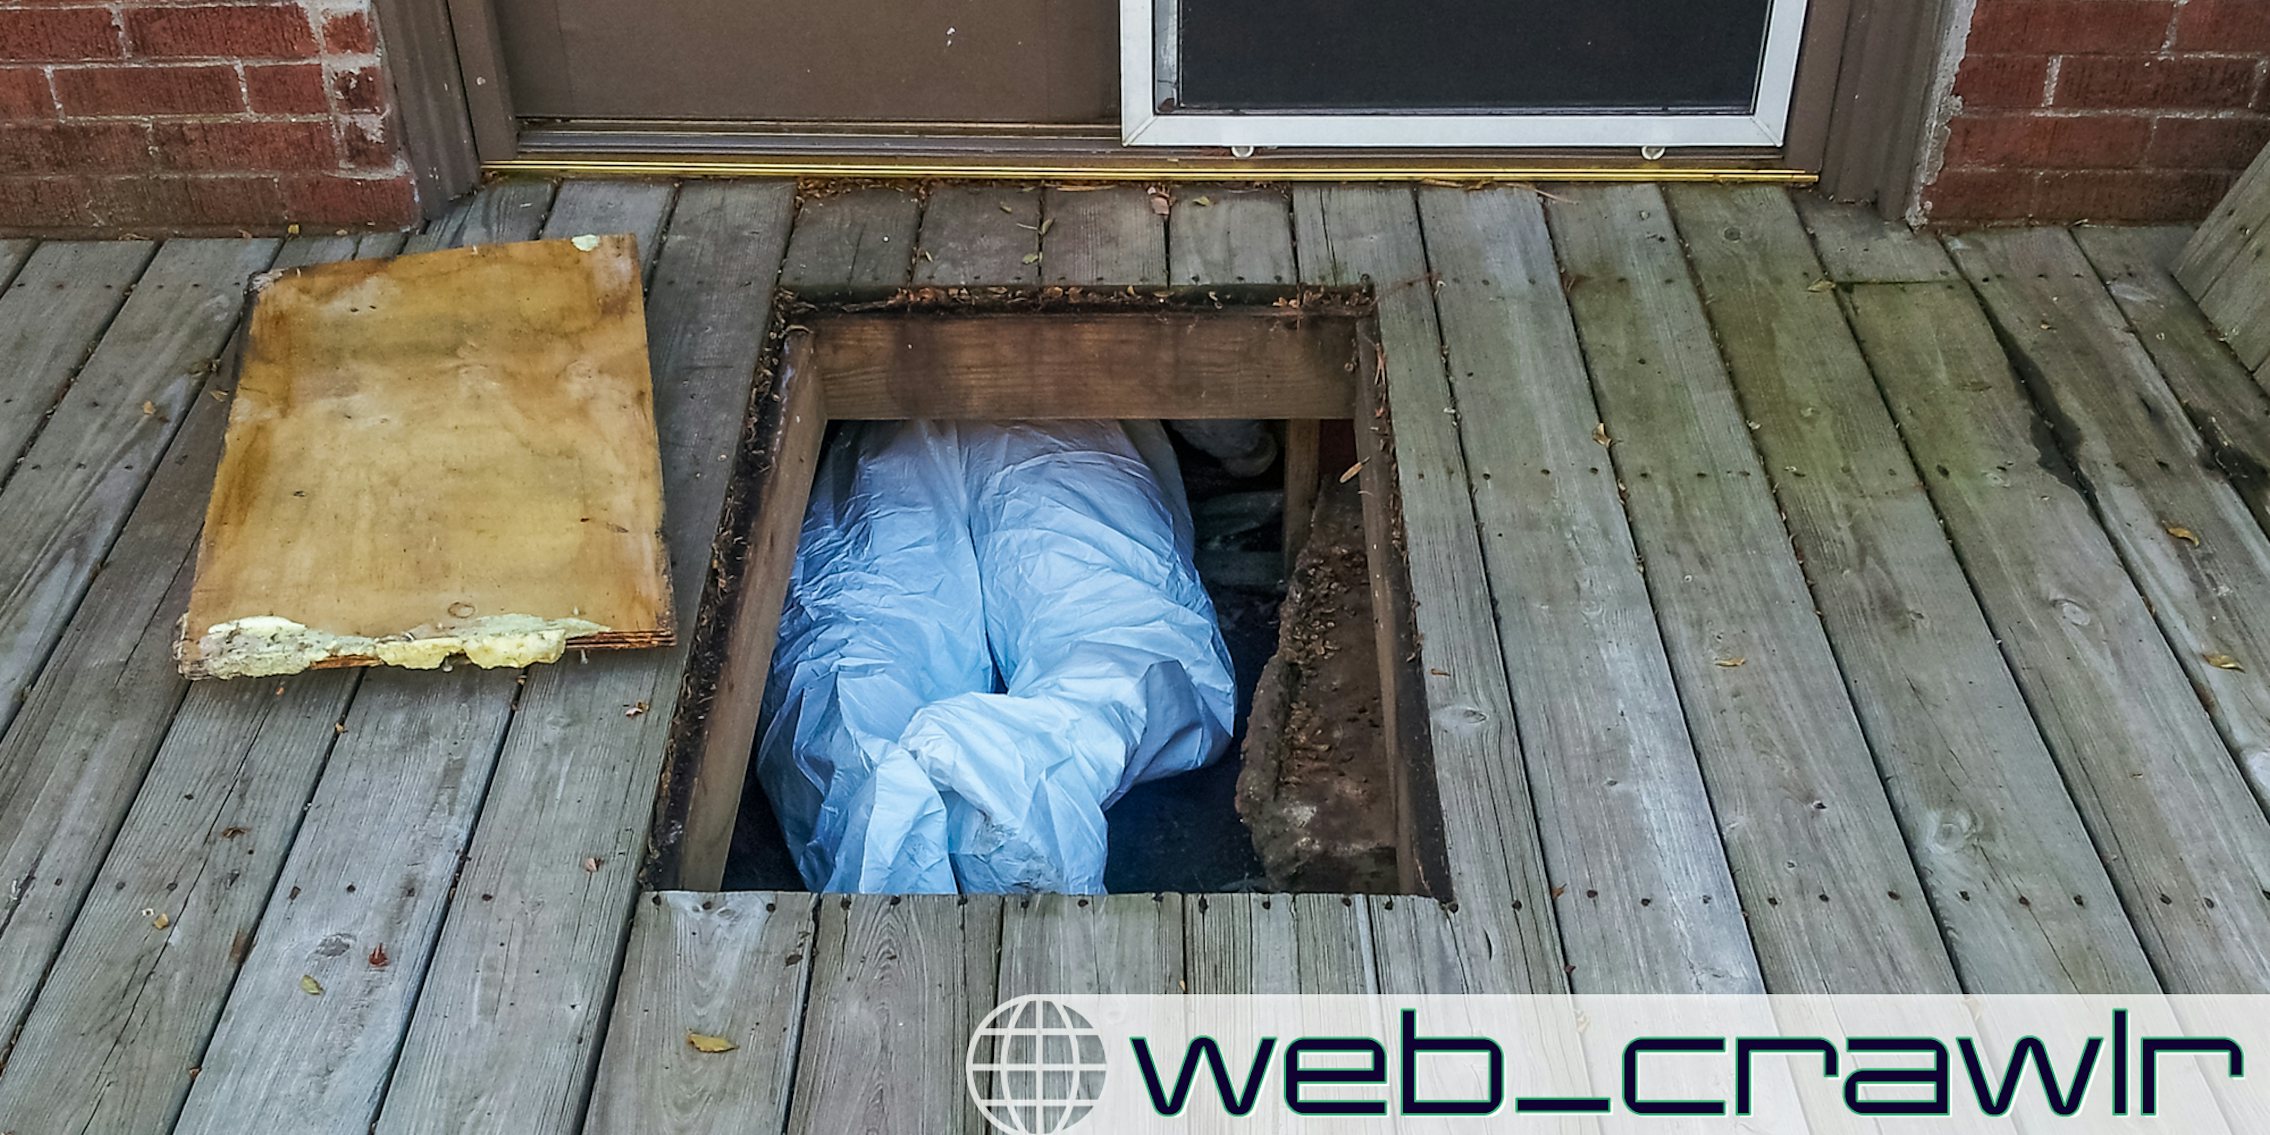 A person crawling underneath a deck attached to a house. The Daily Dot newsletter web_crawlr logo is in the bottom right corner.